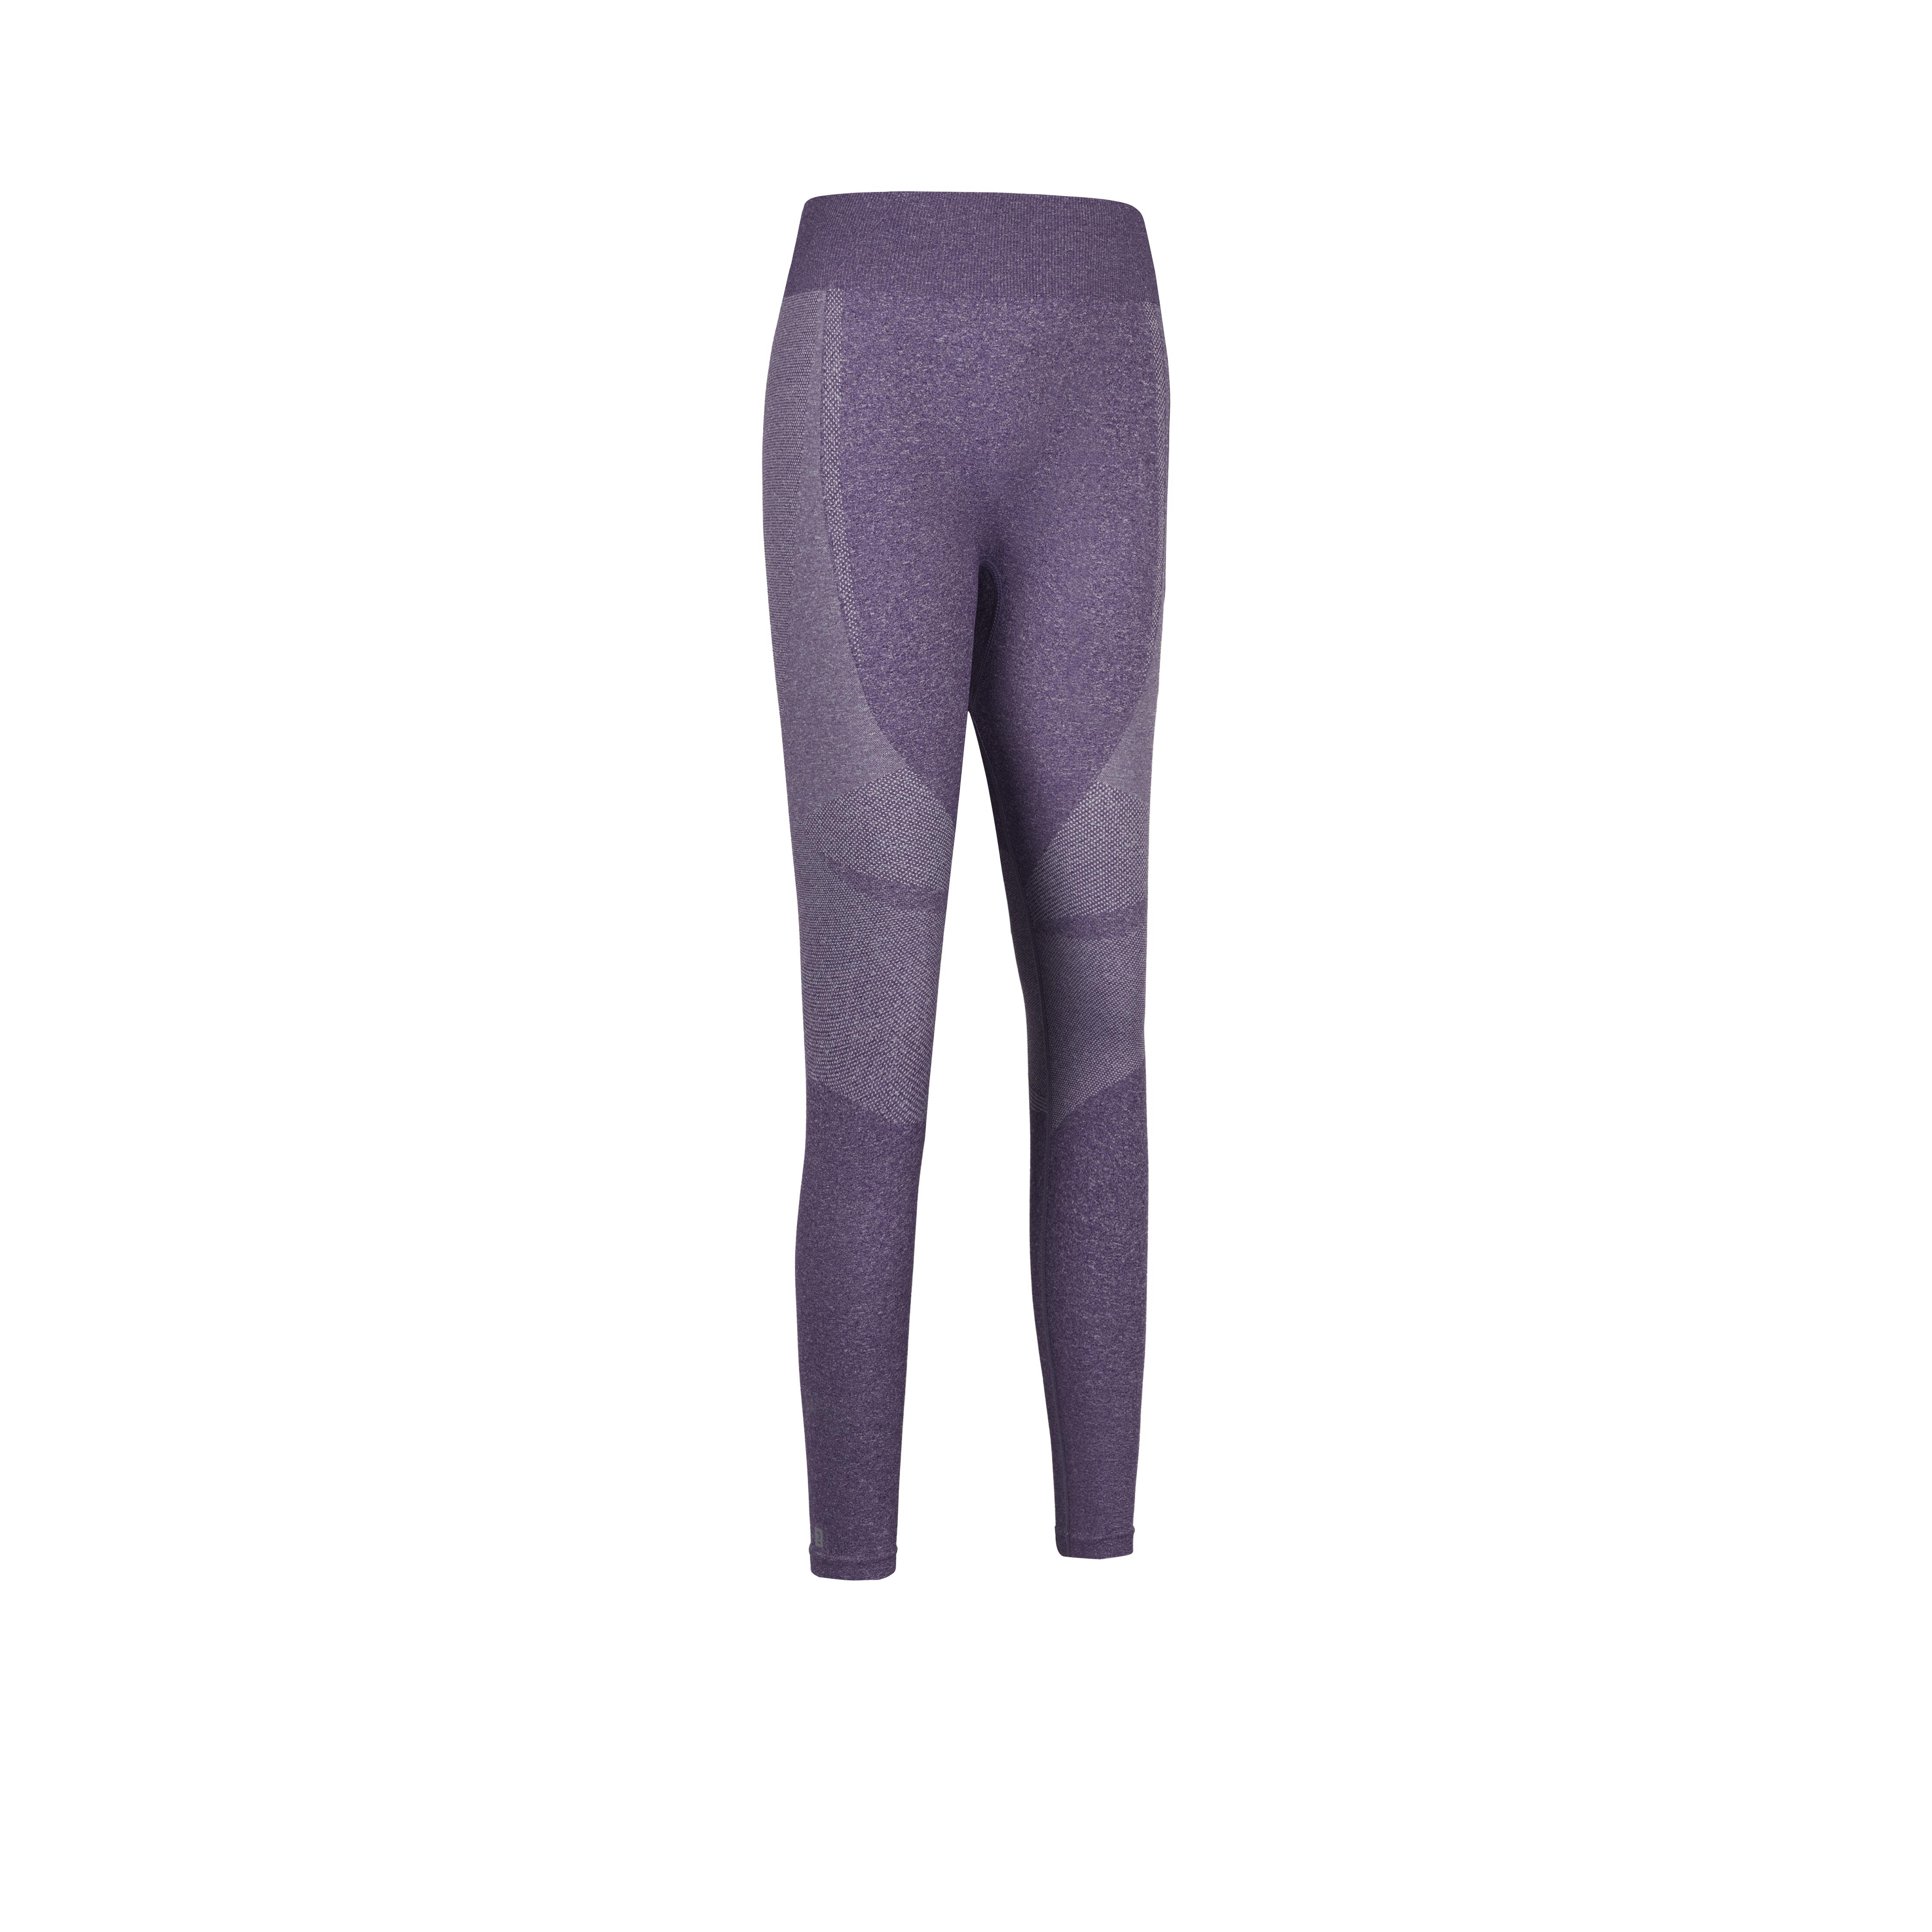 NEW WOMENS HIGH WAISTED TIME AND TRU DARK PURPLE LEGGINGS SIZE